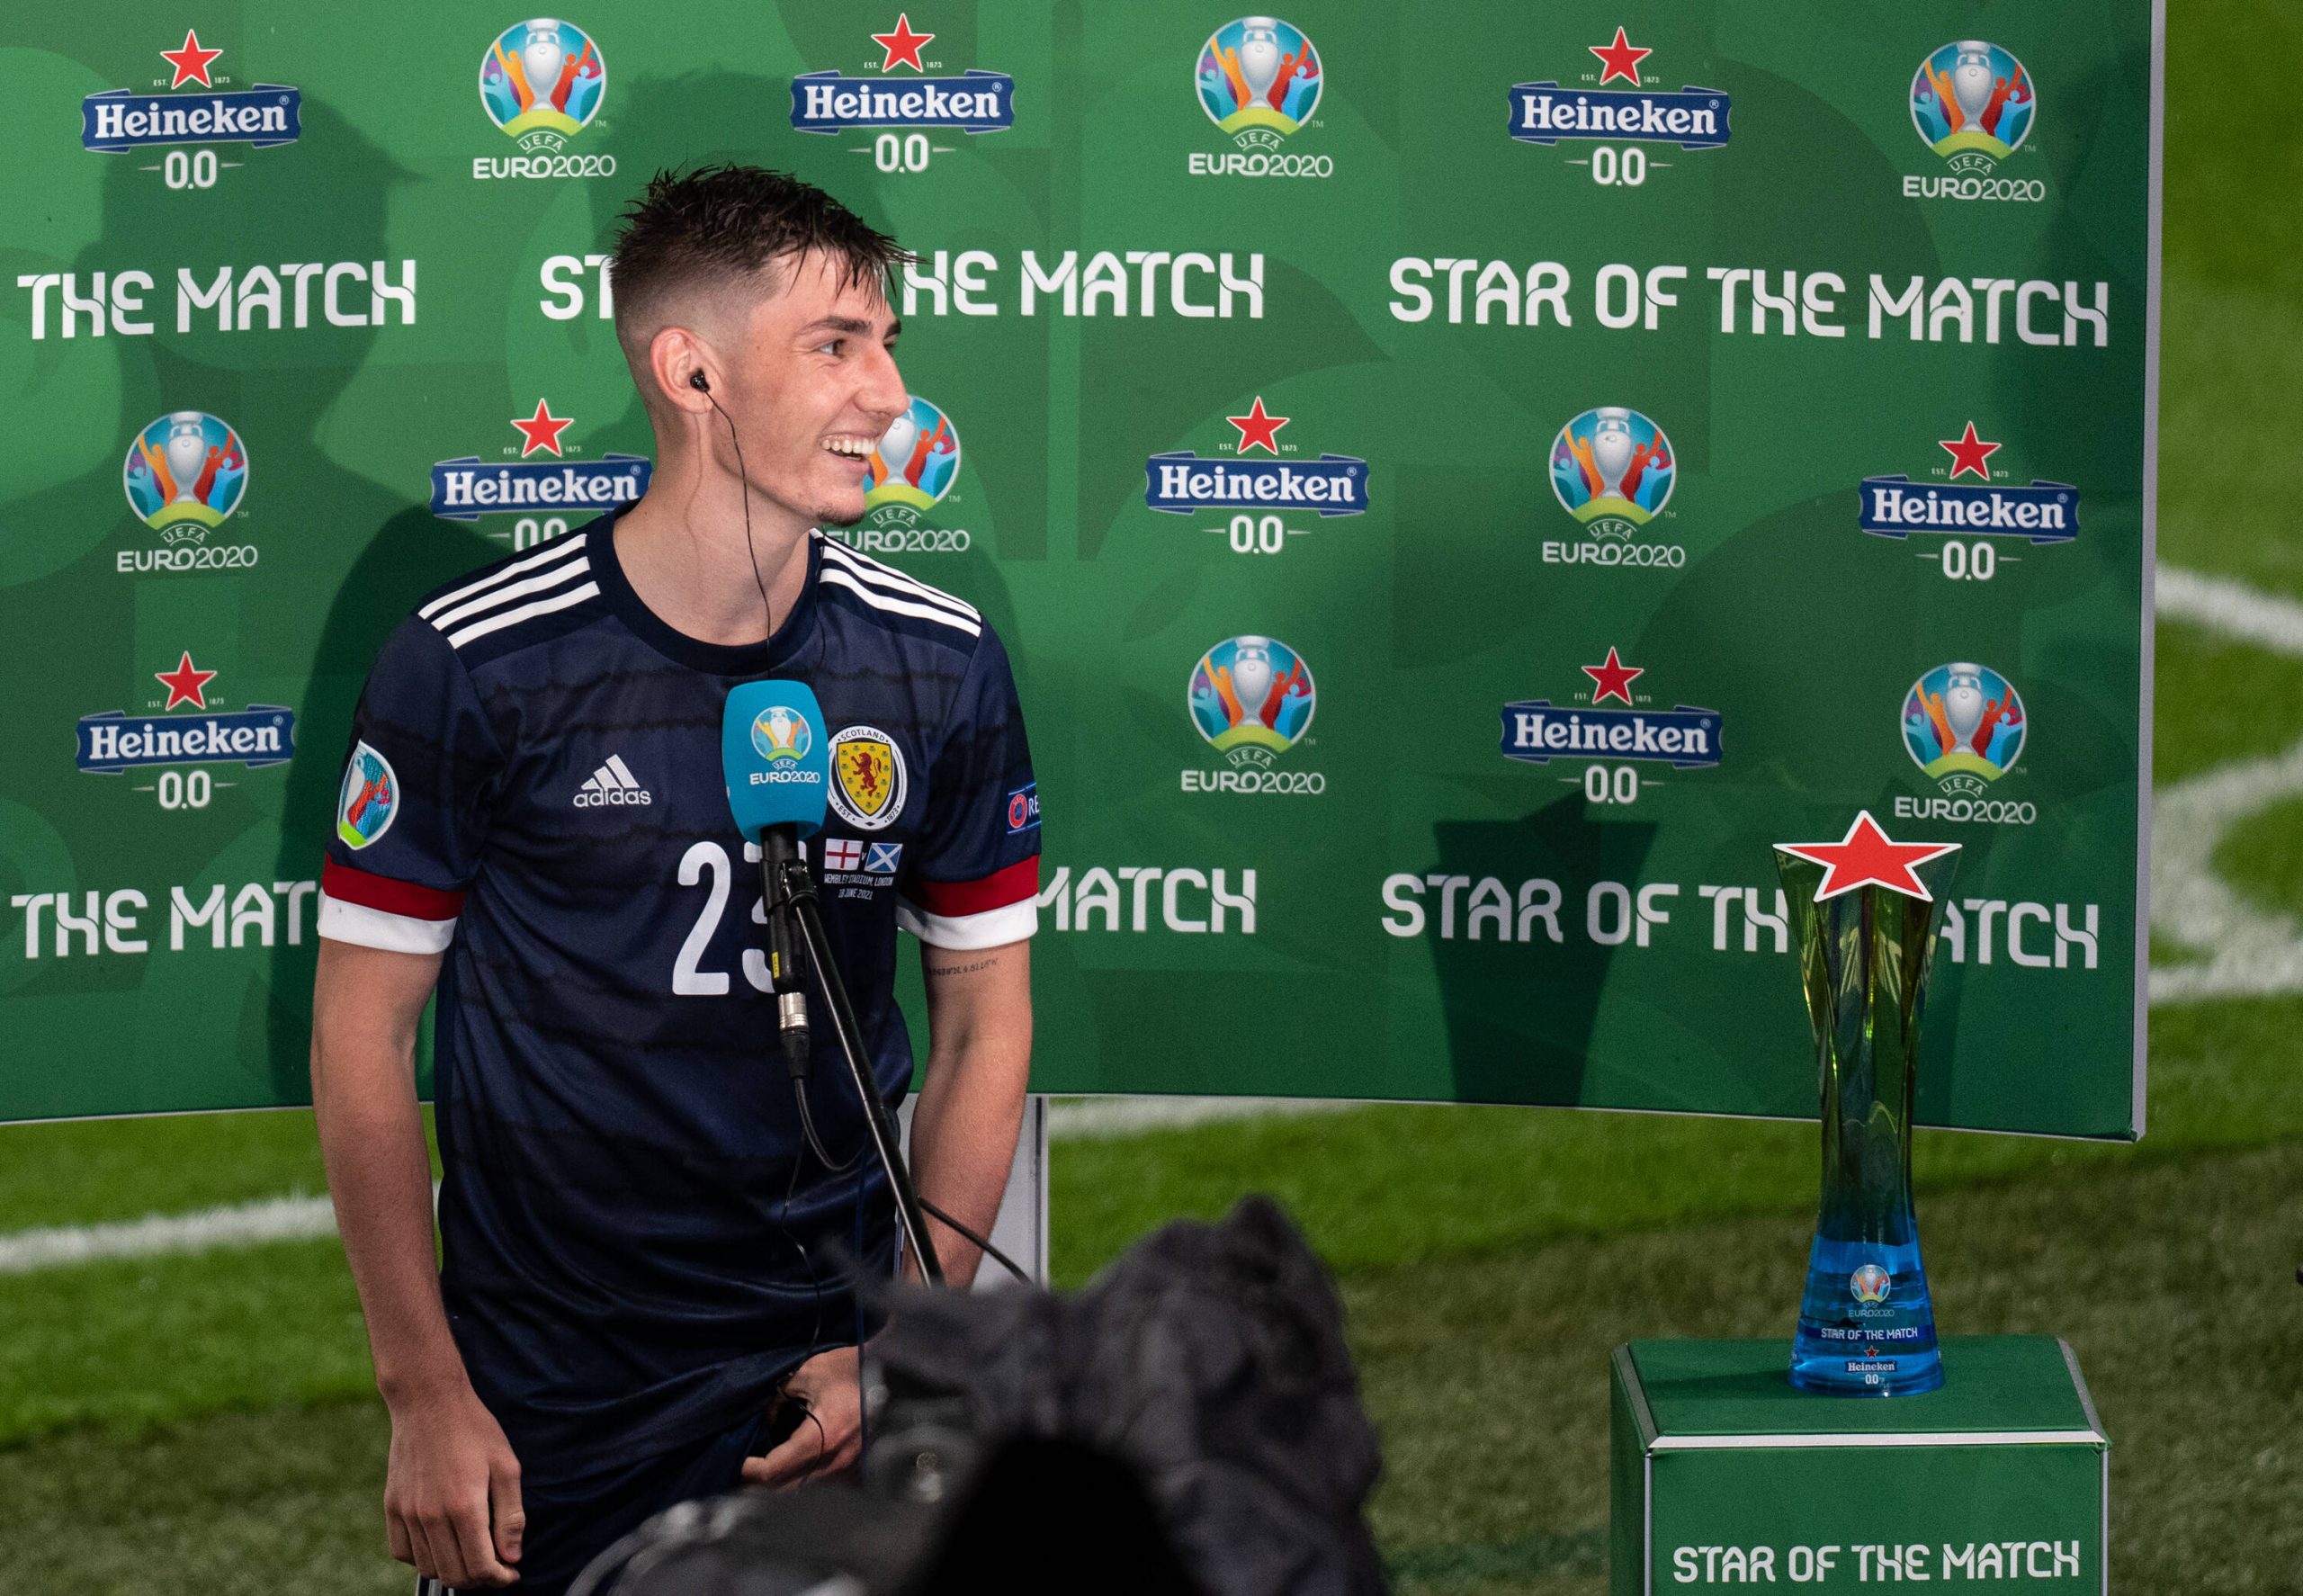 Thomas Tuchel advised Chelsea starlet Billy Gilmour to join Graham Potter's Brighton in the summer.